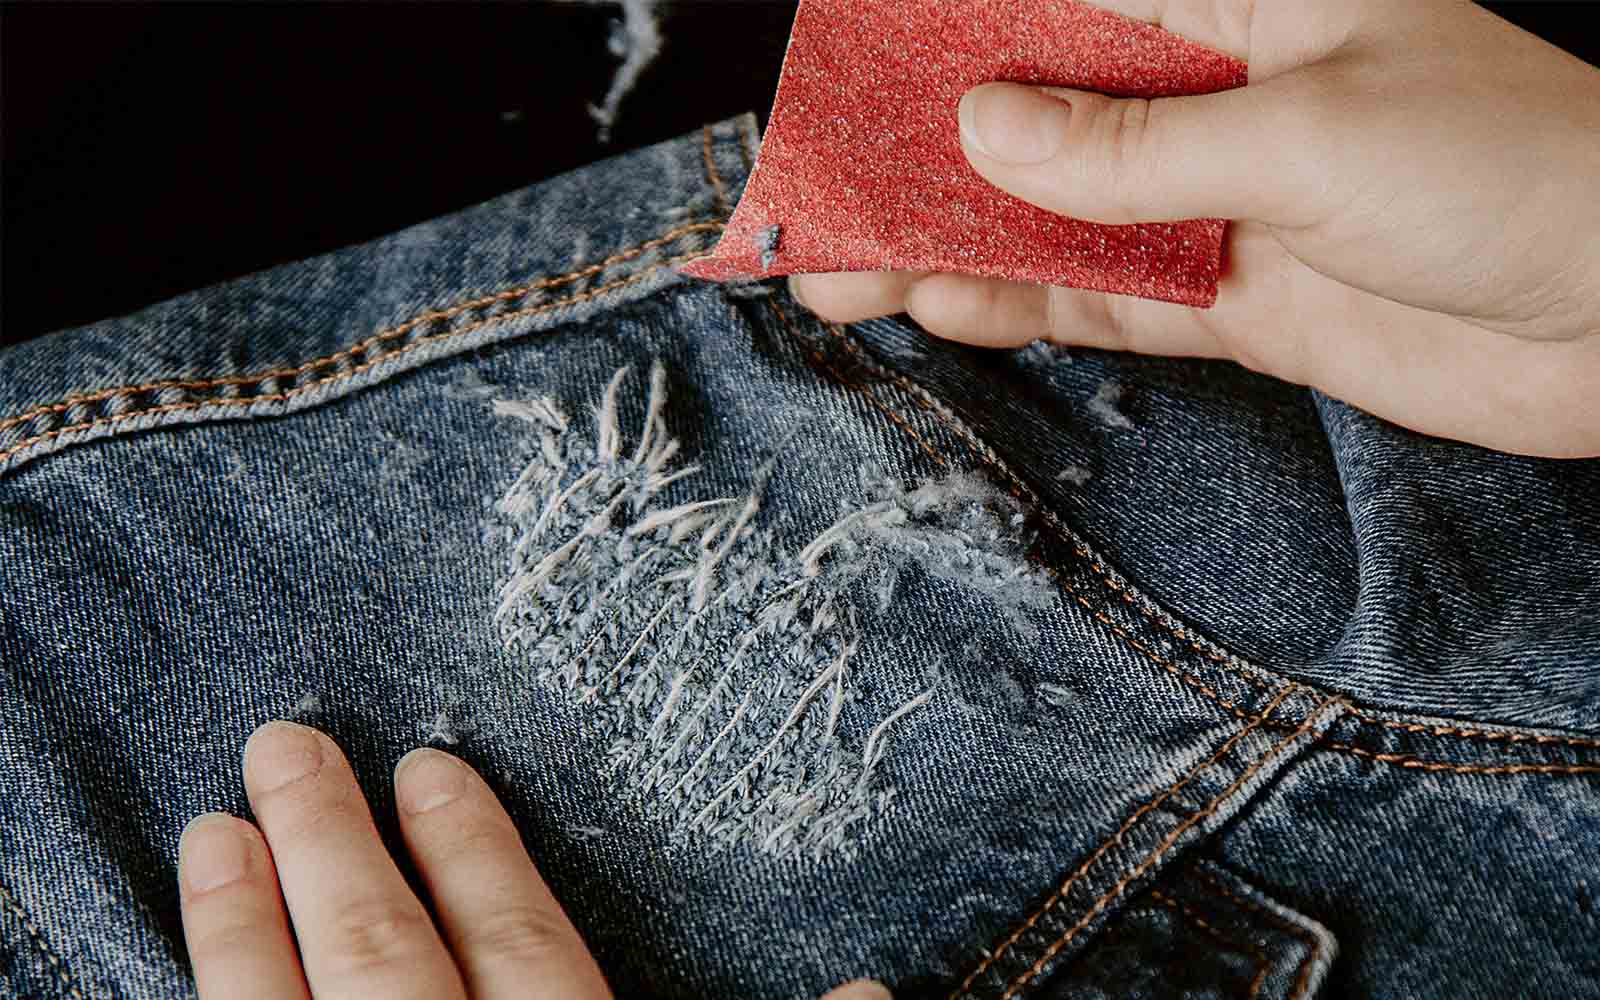 How To Rip Jeans With Sandpaper